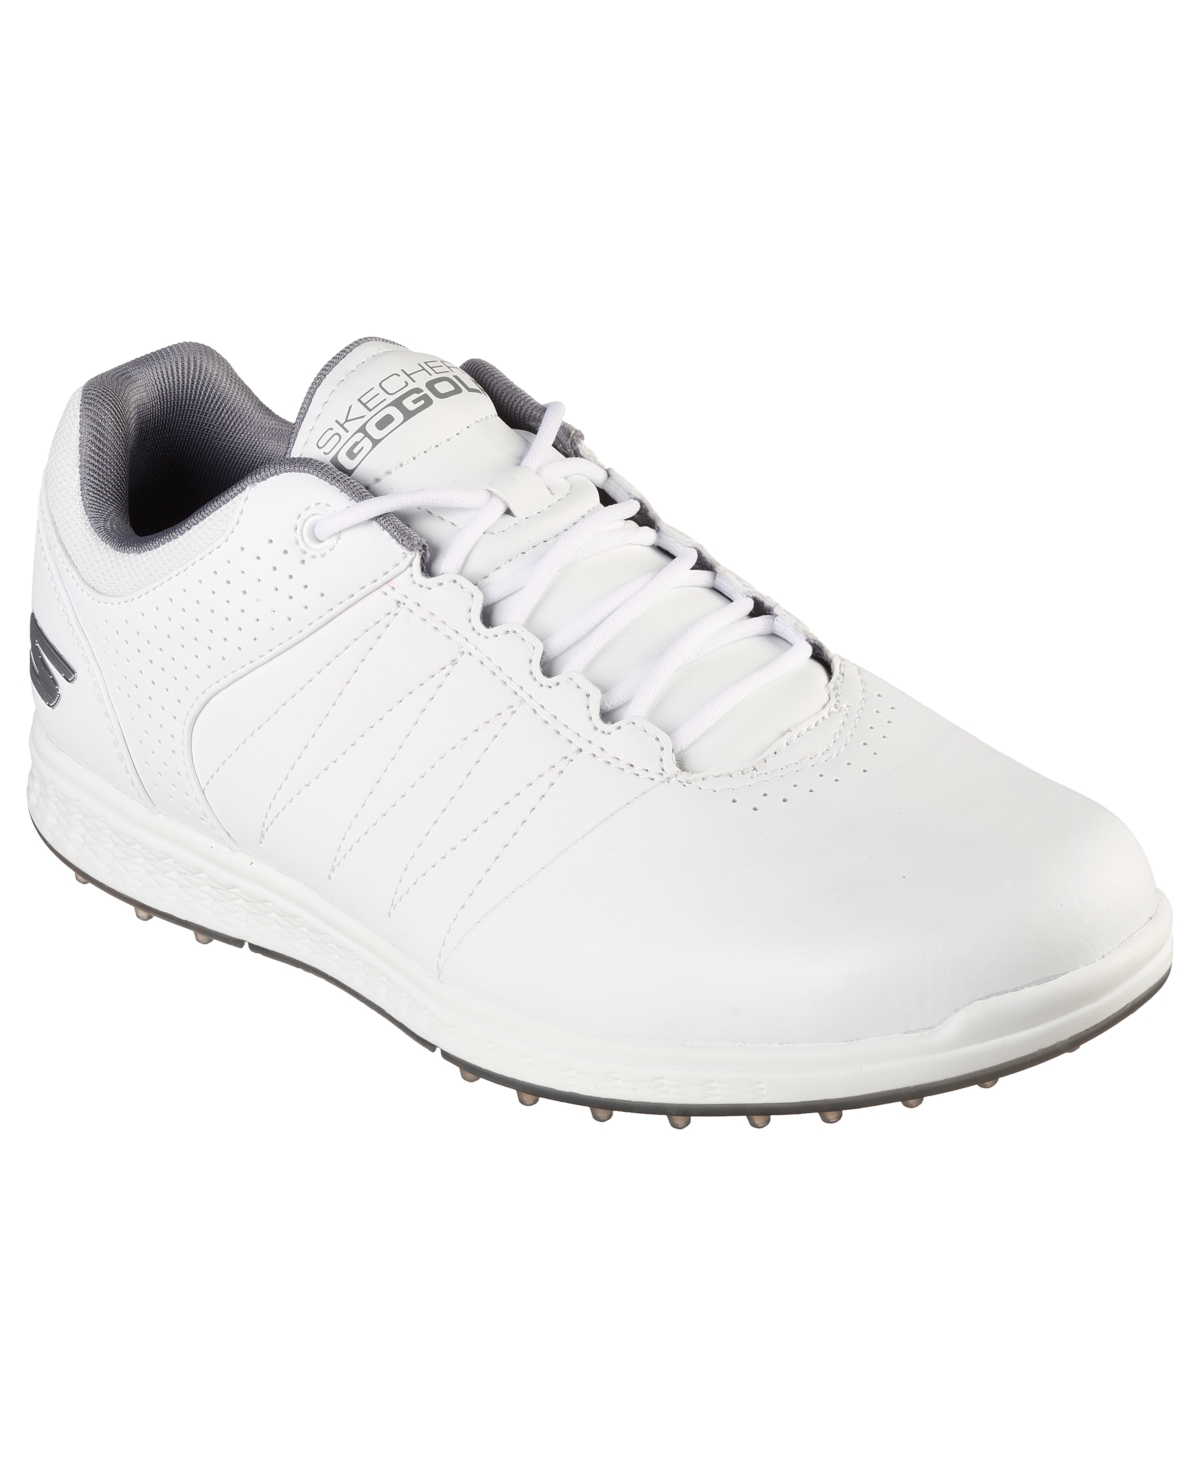 Men's Go Golf Pivot Golf Sneakers from Finish Line - White/Silver Grey